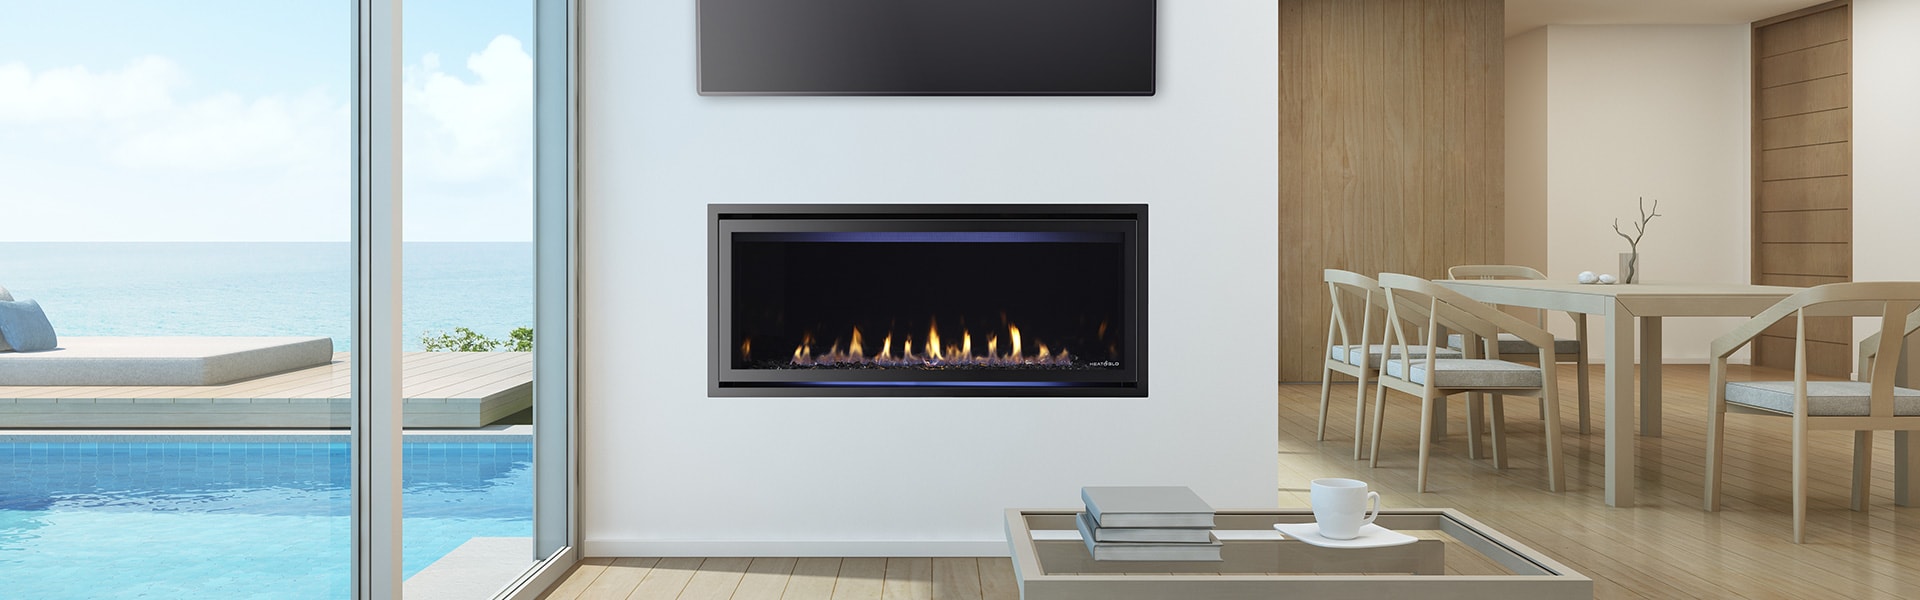 Heat and Glo Fireplace Insert Fresh Cosmo 42 Gas Fireplace